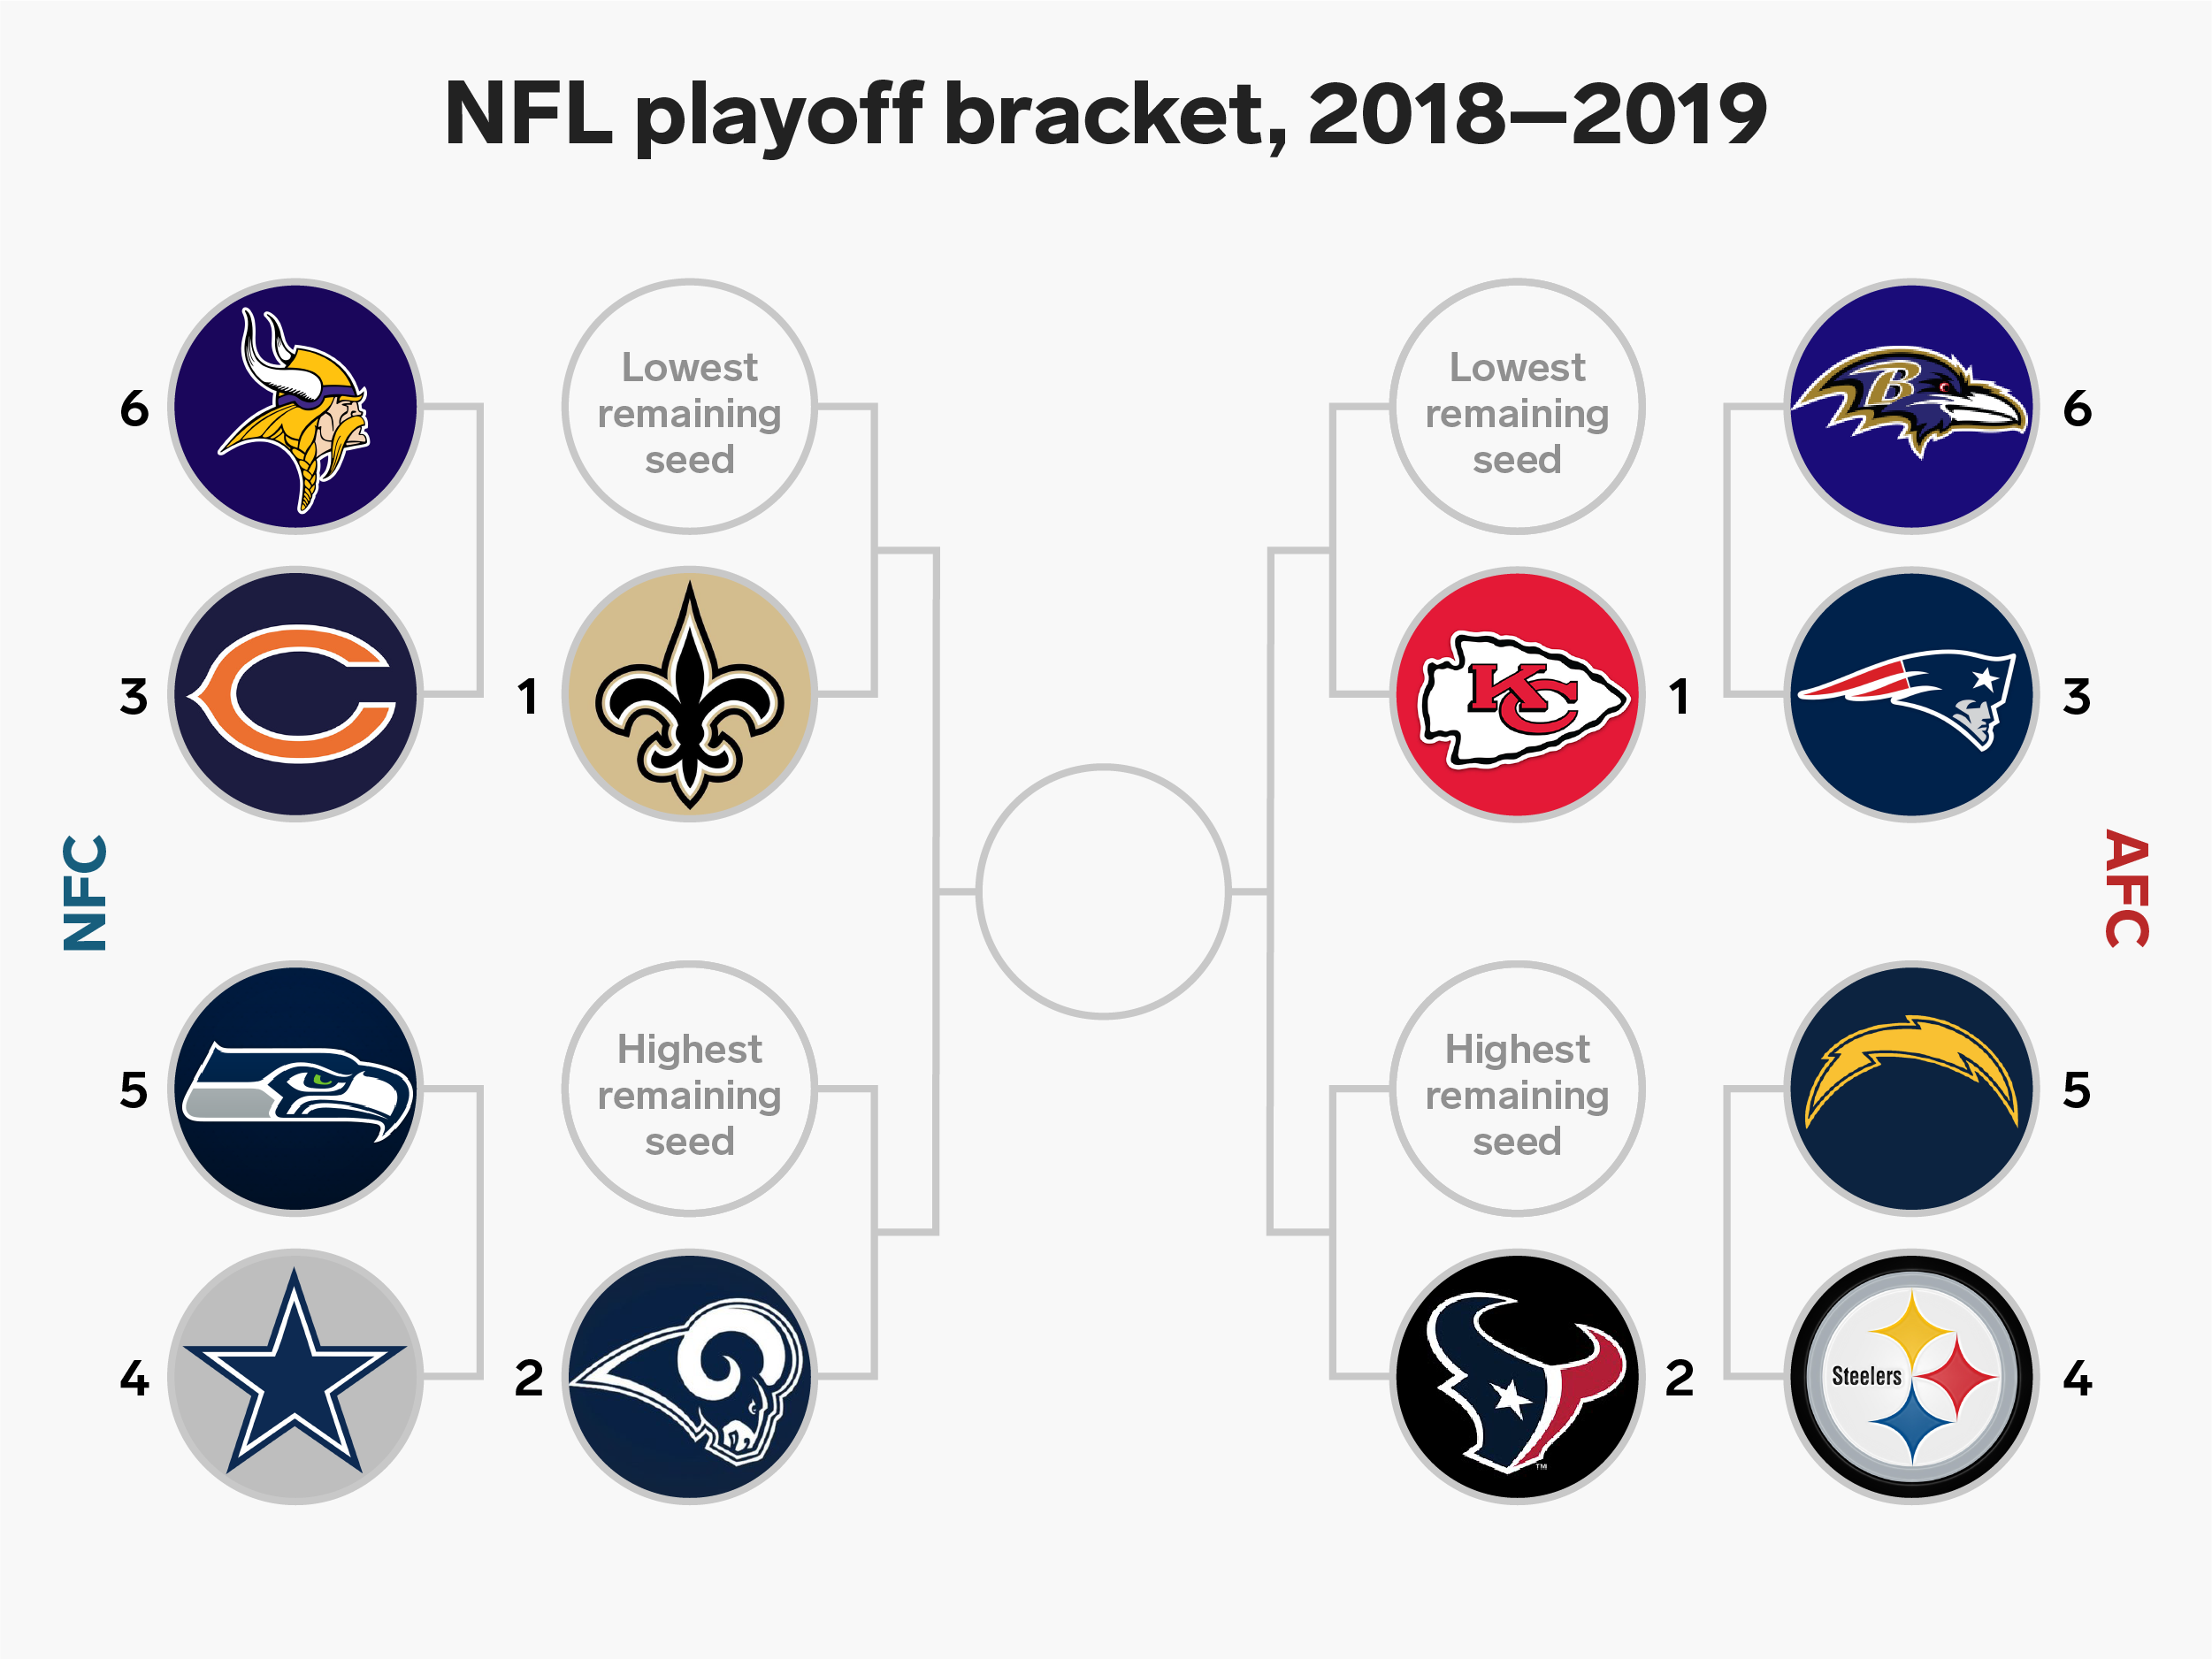 Here's how the NFL playoff bracket would look if the season ended today